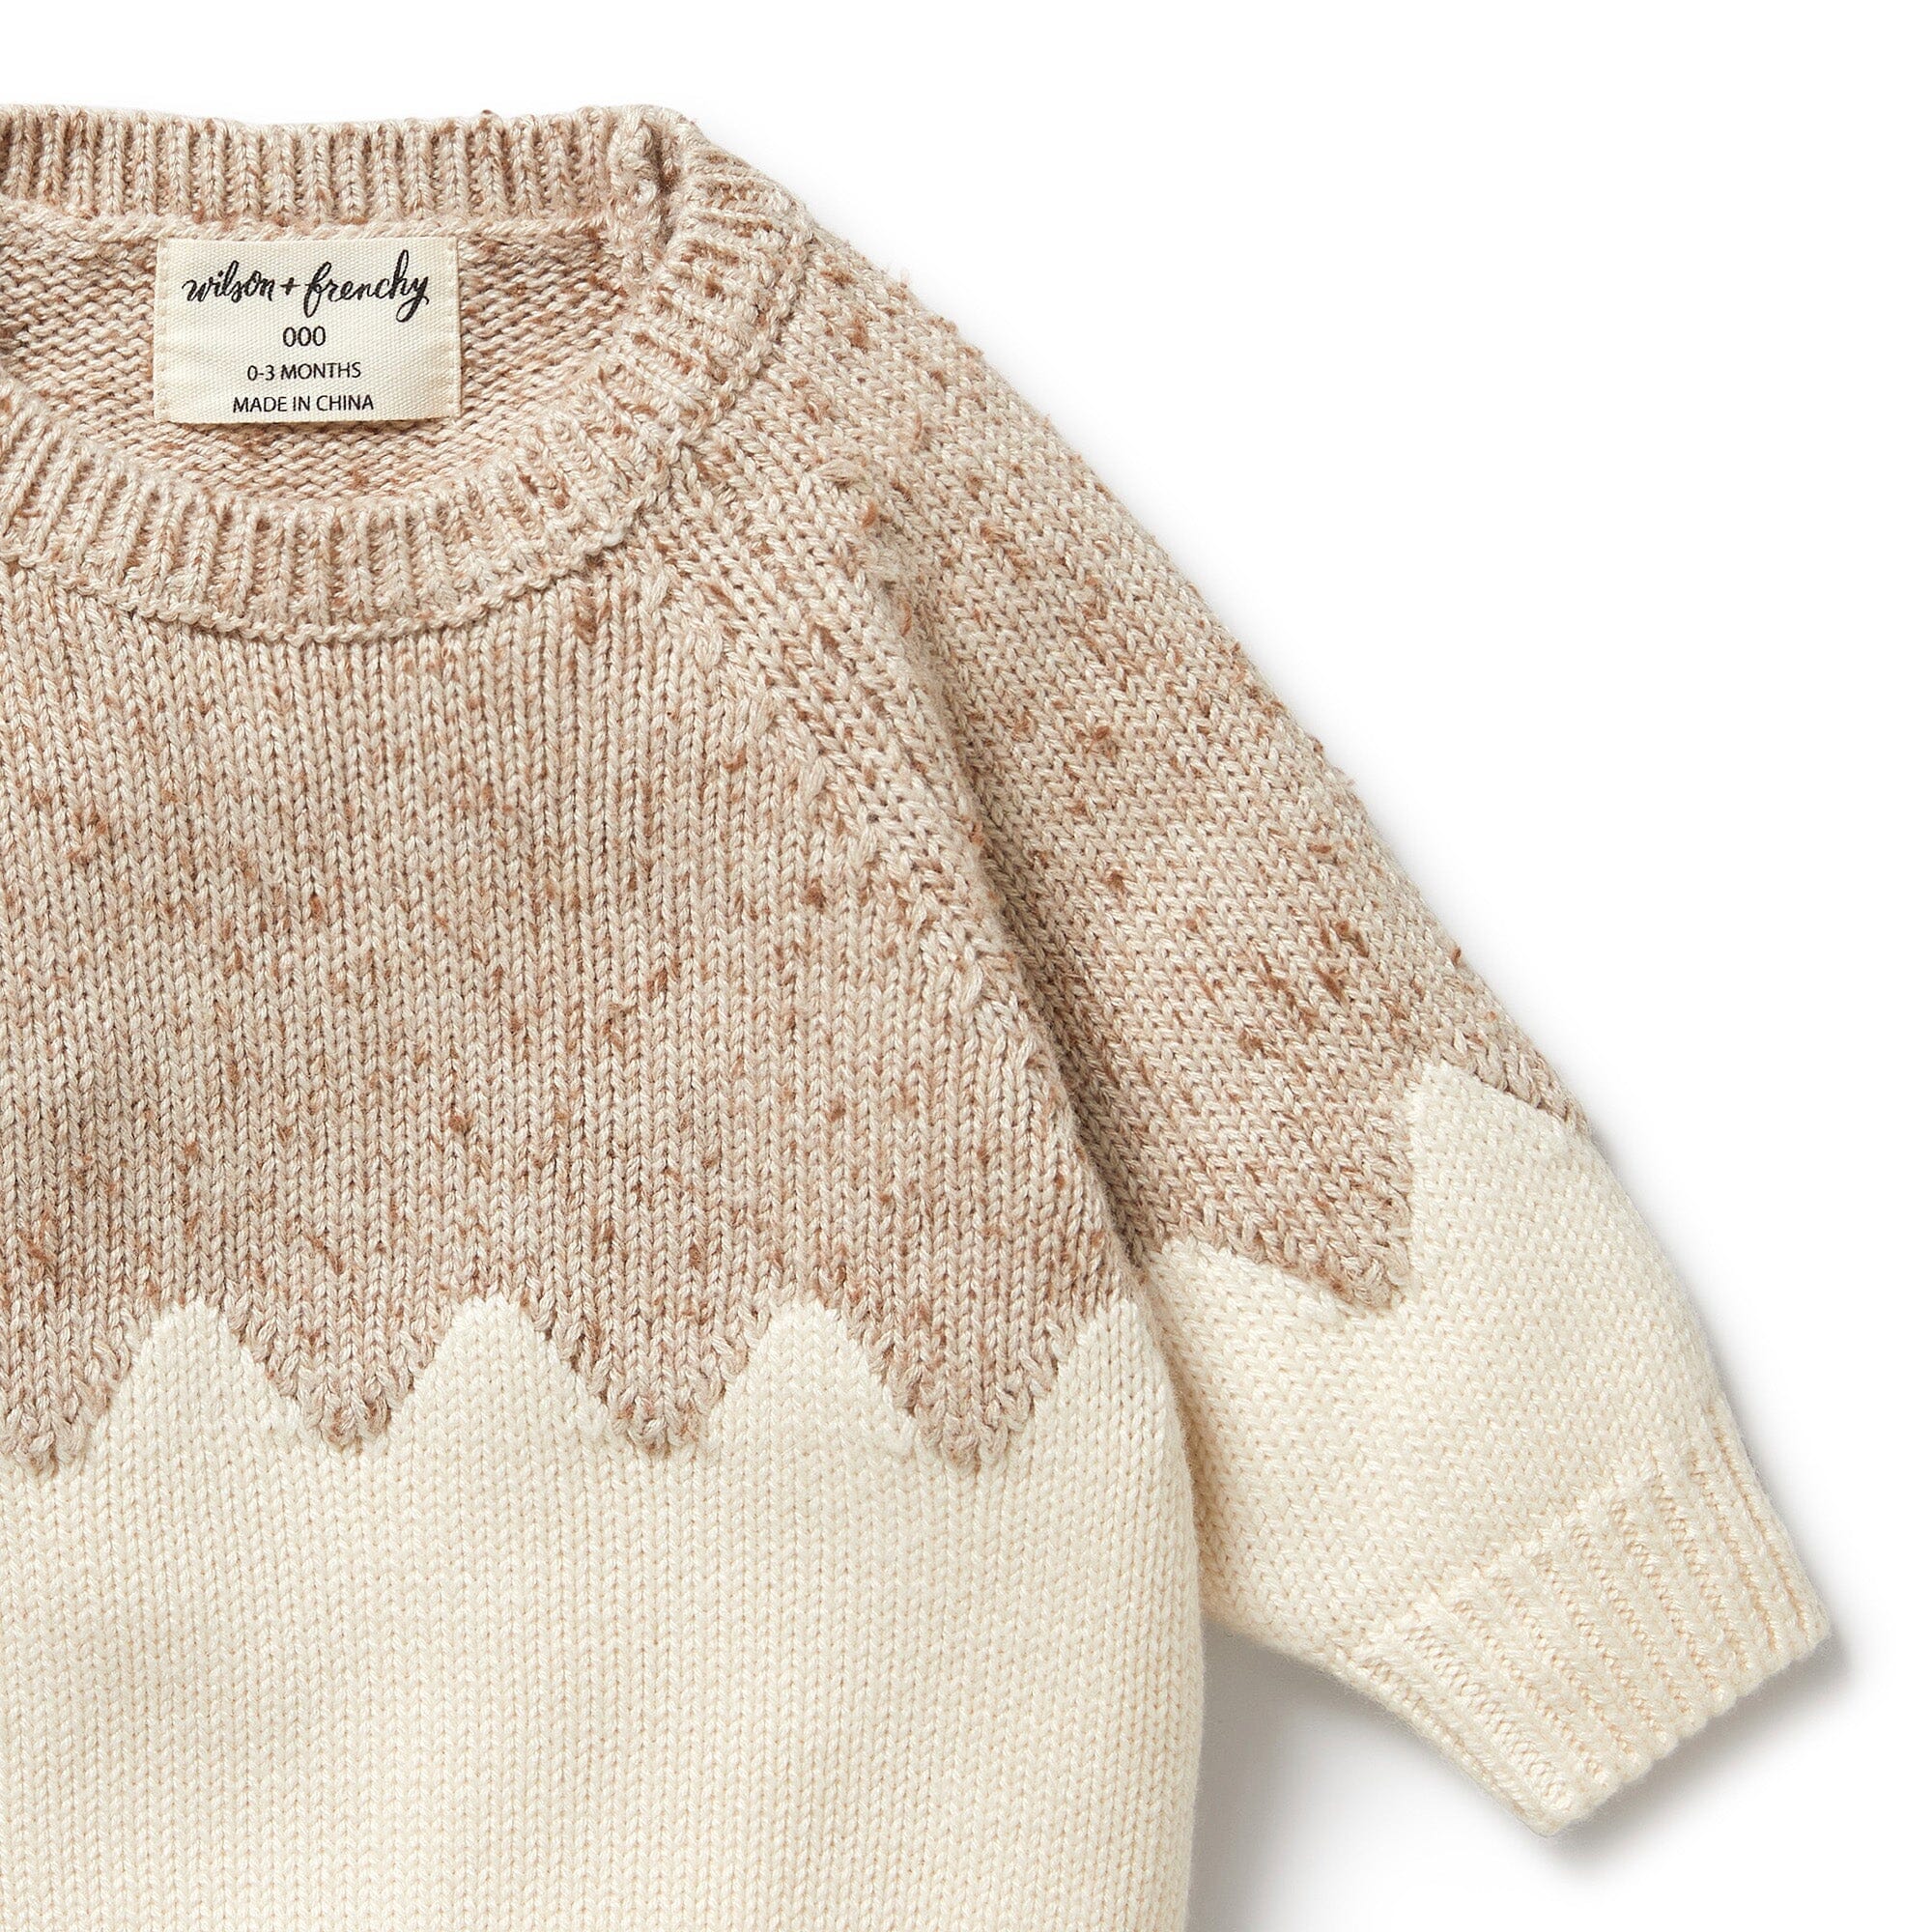 Wilson & Frenchy - Knitted Jacquard Jumper - Almond Fleck Baby Wilson & Frenchy